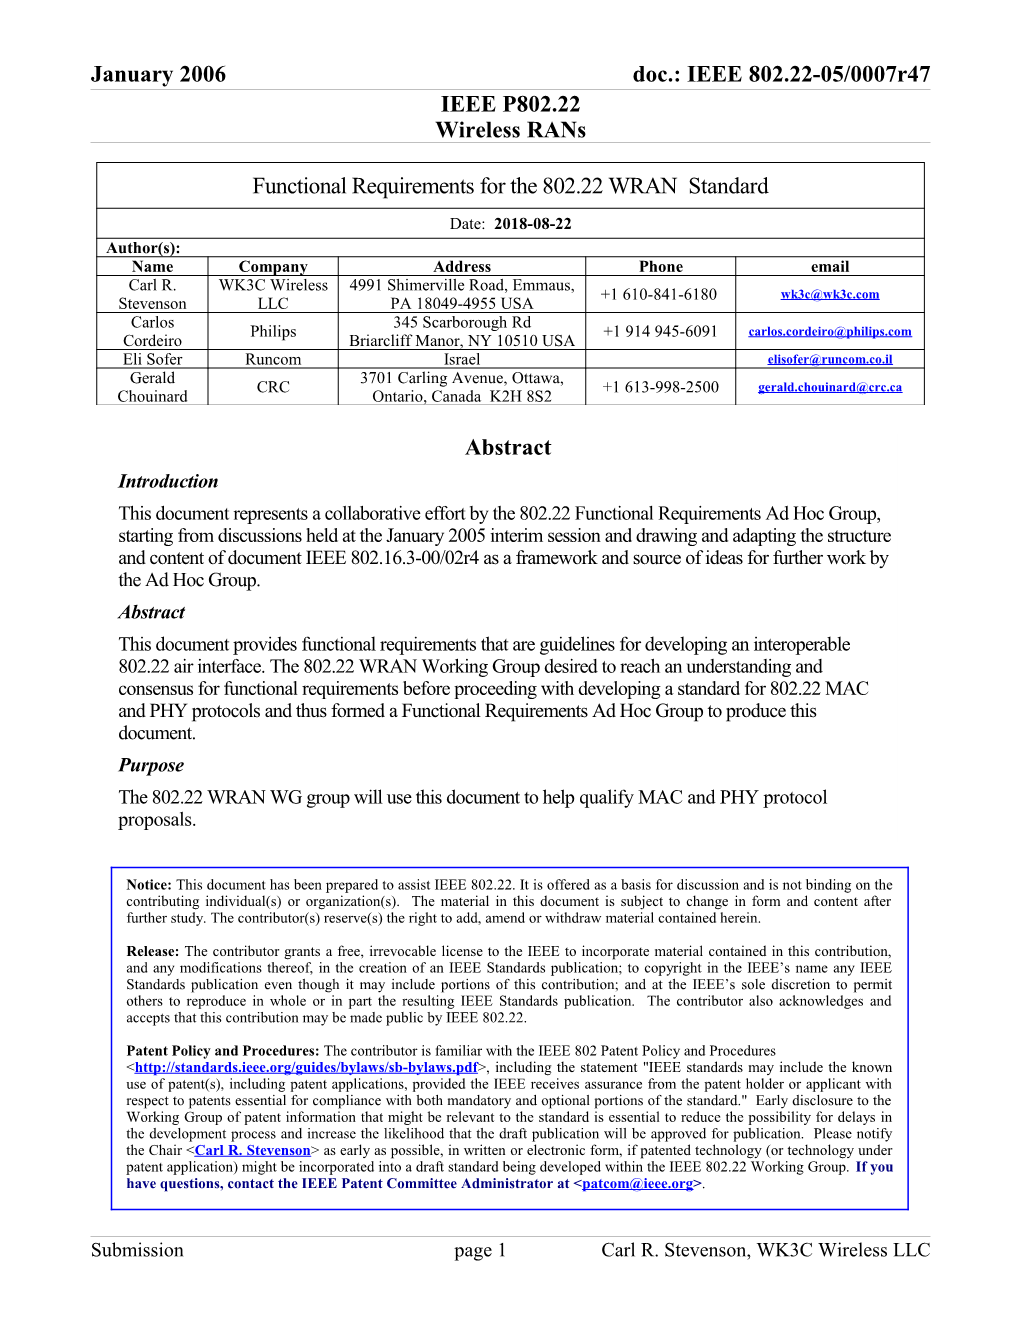 Functional Requirements for the 802.22 WRAN Standard